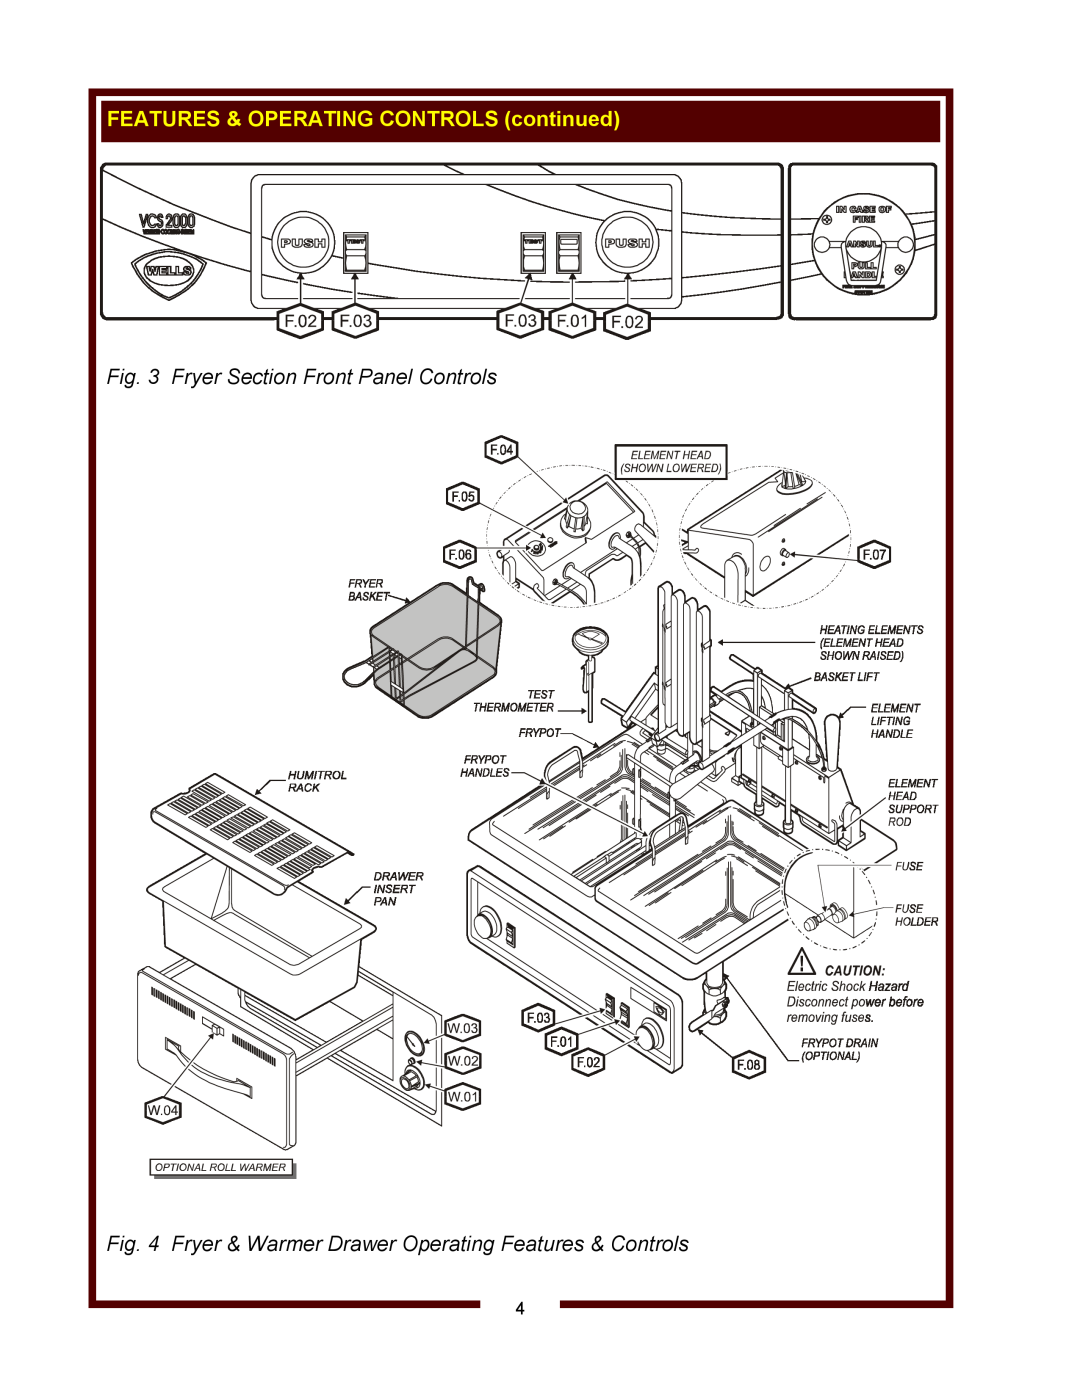 Wells WVF-886 operation manual Fryer Section Front Panel Controls, Fryer & Warmer Drawer Operating Features & Controls 